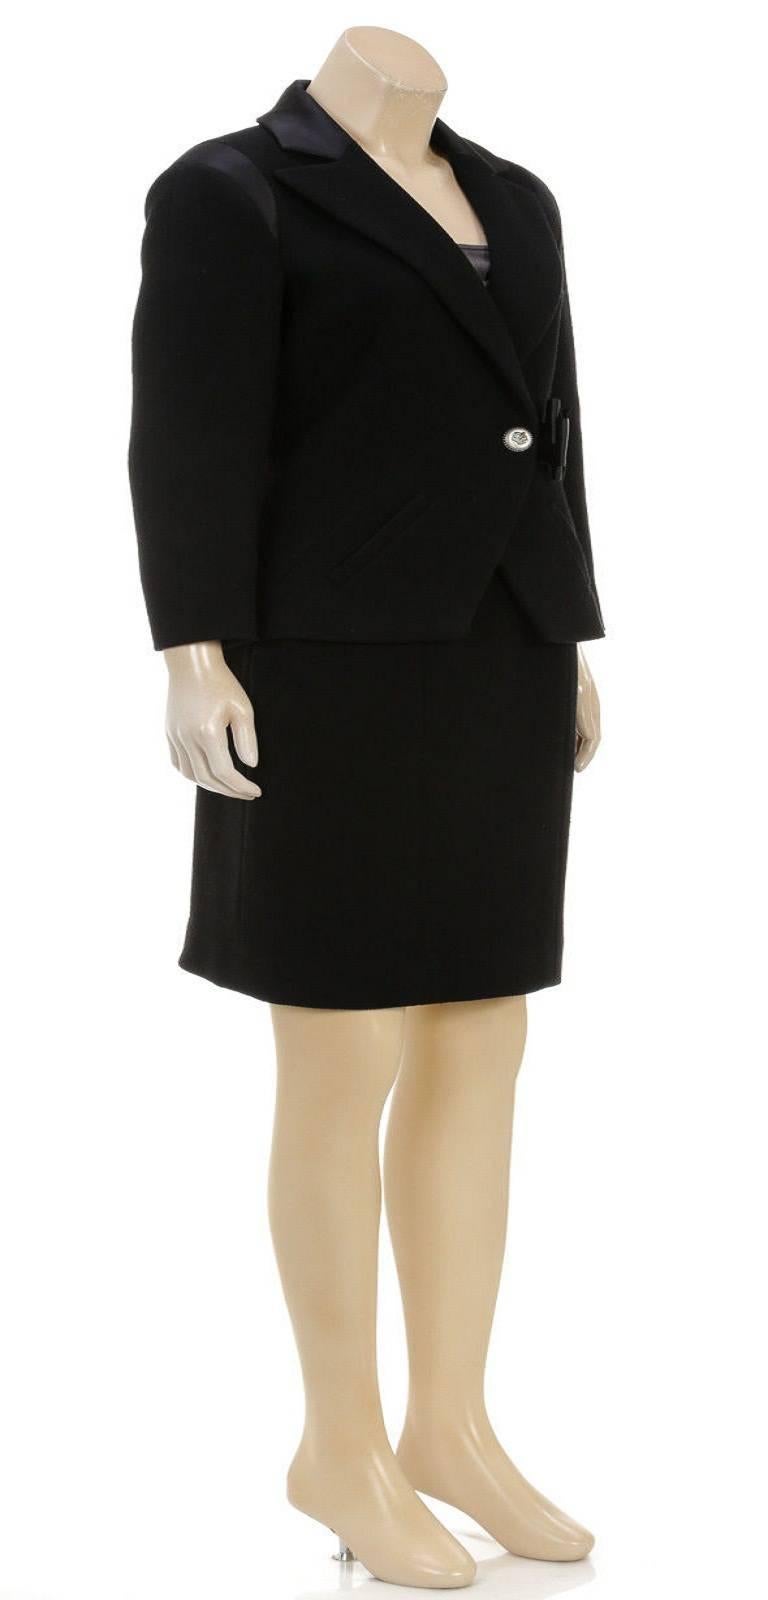 Chanel Black Wool and Silk Bow Jacket and Skirt Suit 08A (Size 40) In Good Condition For Sale In Corona Del Mar, CA